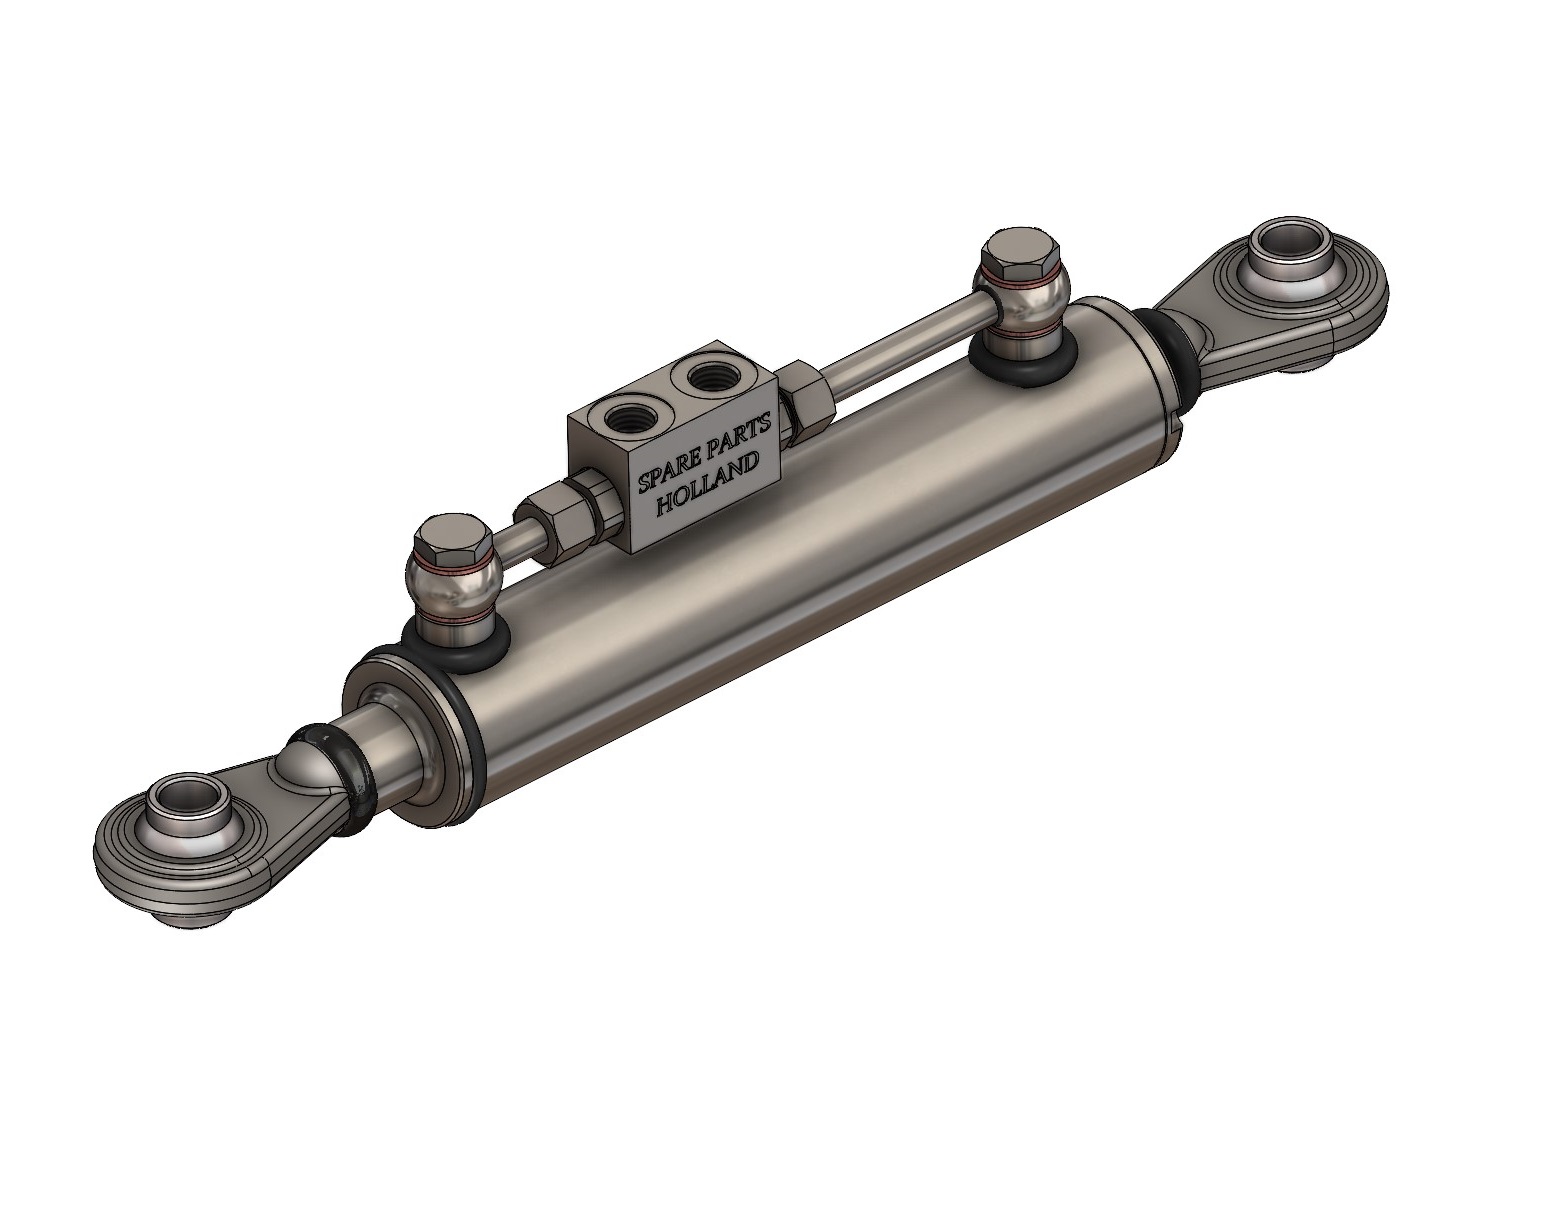 Hydraulic Top Link Cat. 1-1 – Extended – (15 3/8” – 19 3/4”) with Locking Block and 2 x Hoses